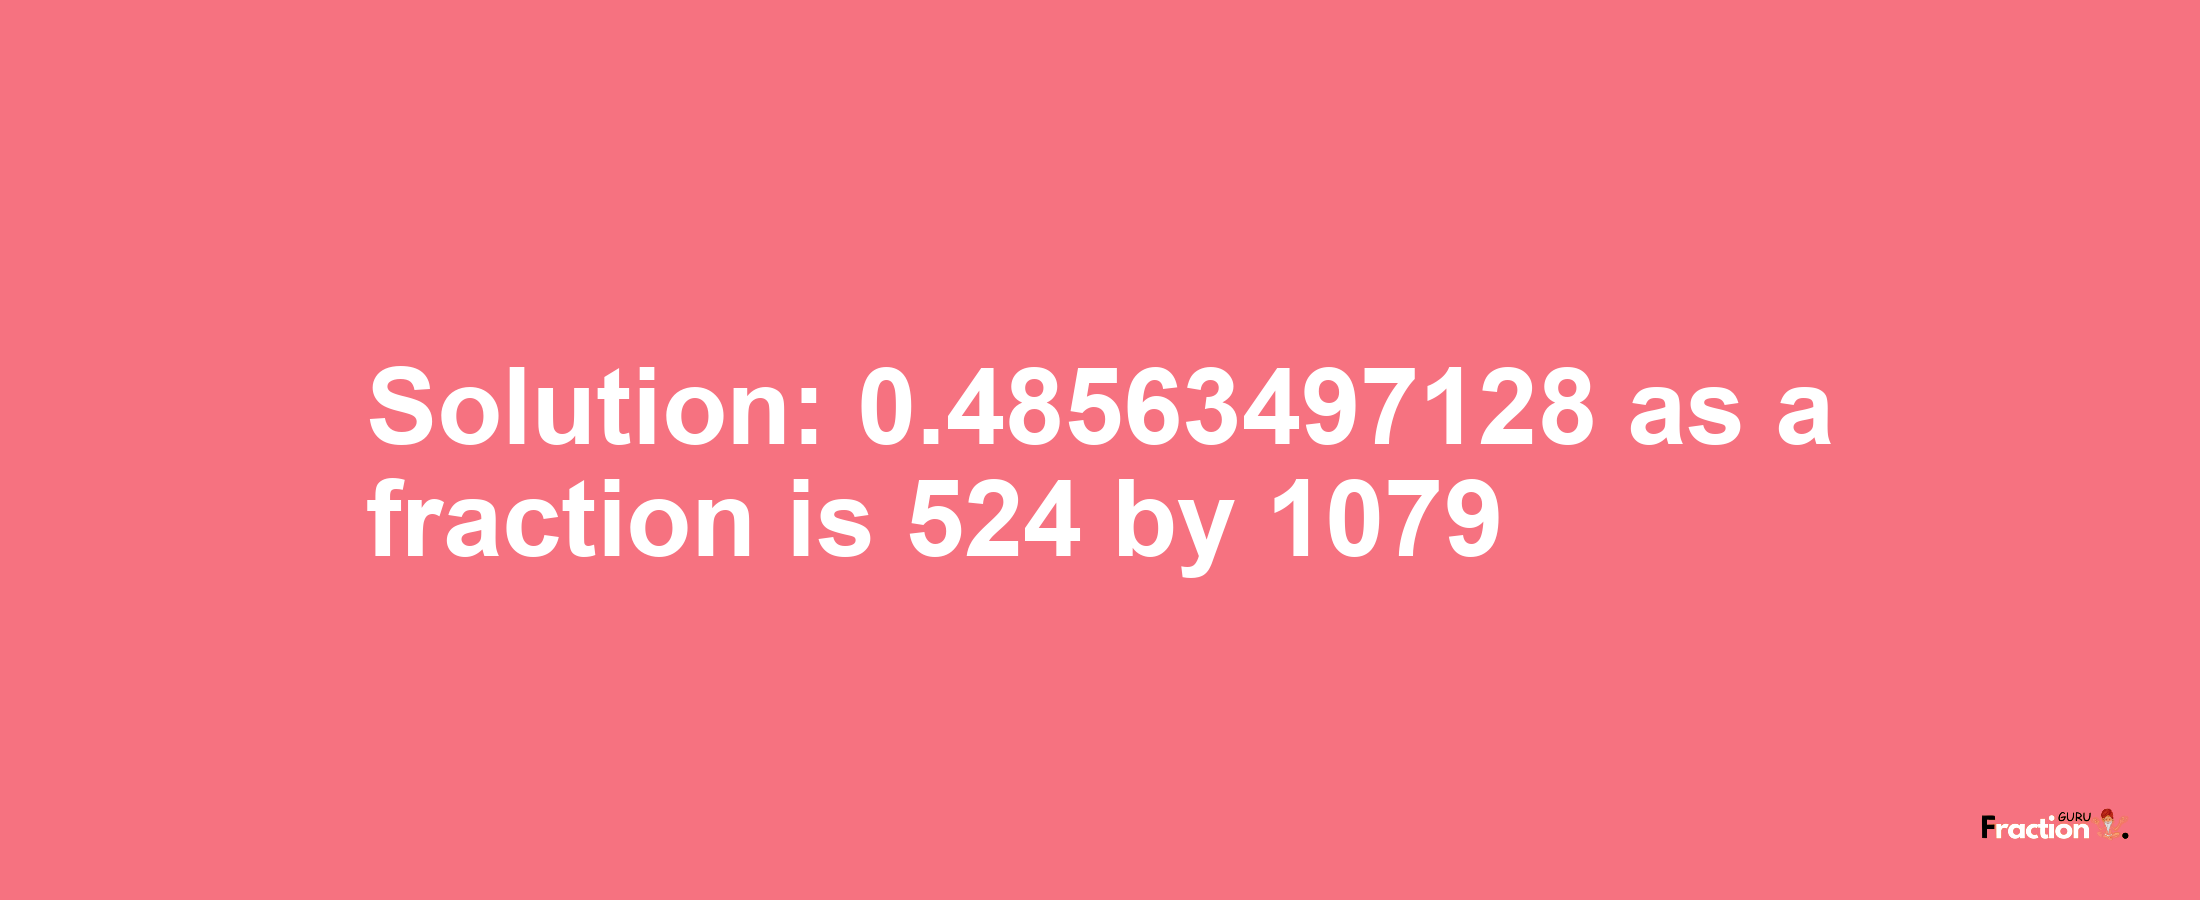 Solution:0.48563497128 as a fraction is 524/1079